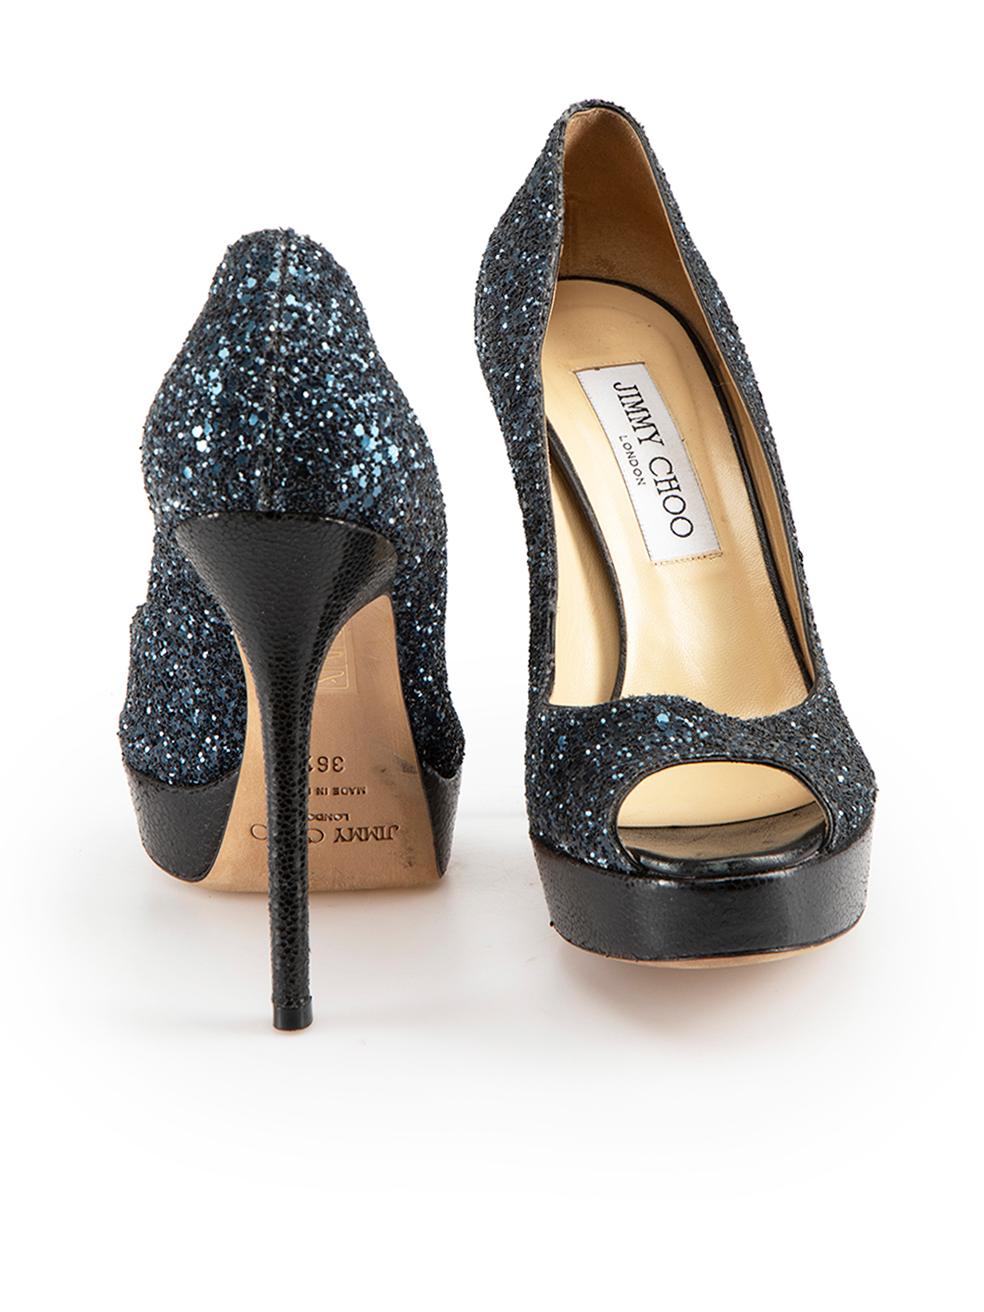 Jimmy Choo Navy Glitter Peep Toe Platform Heels Size IT 36.5 In Excellent Condition For Sale In London, GB